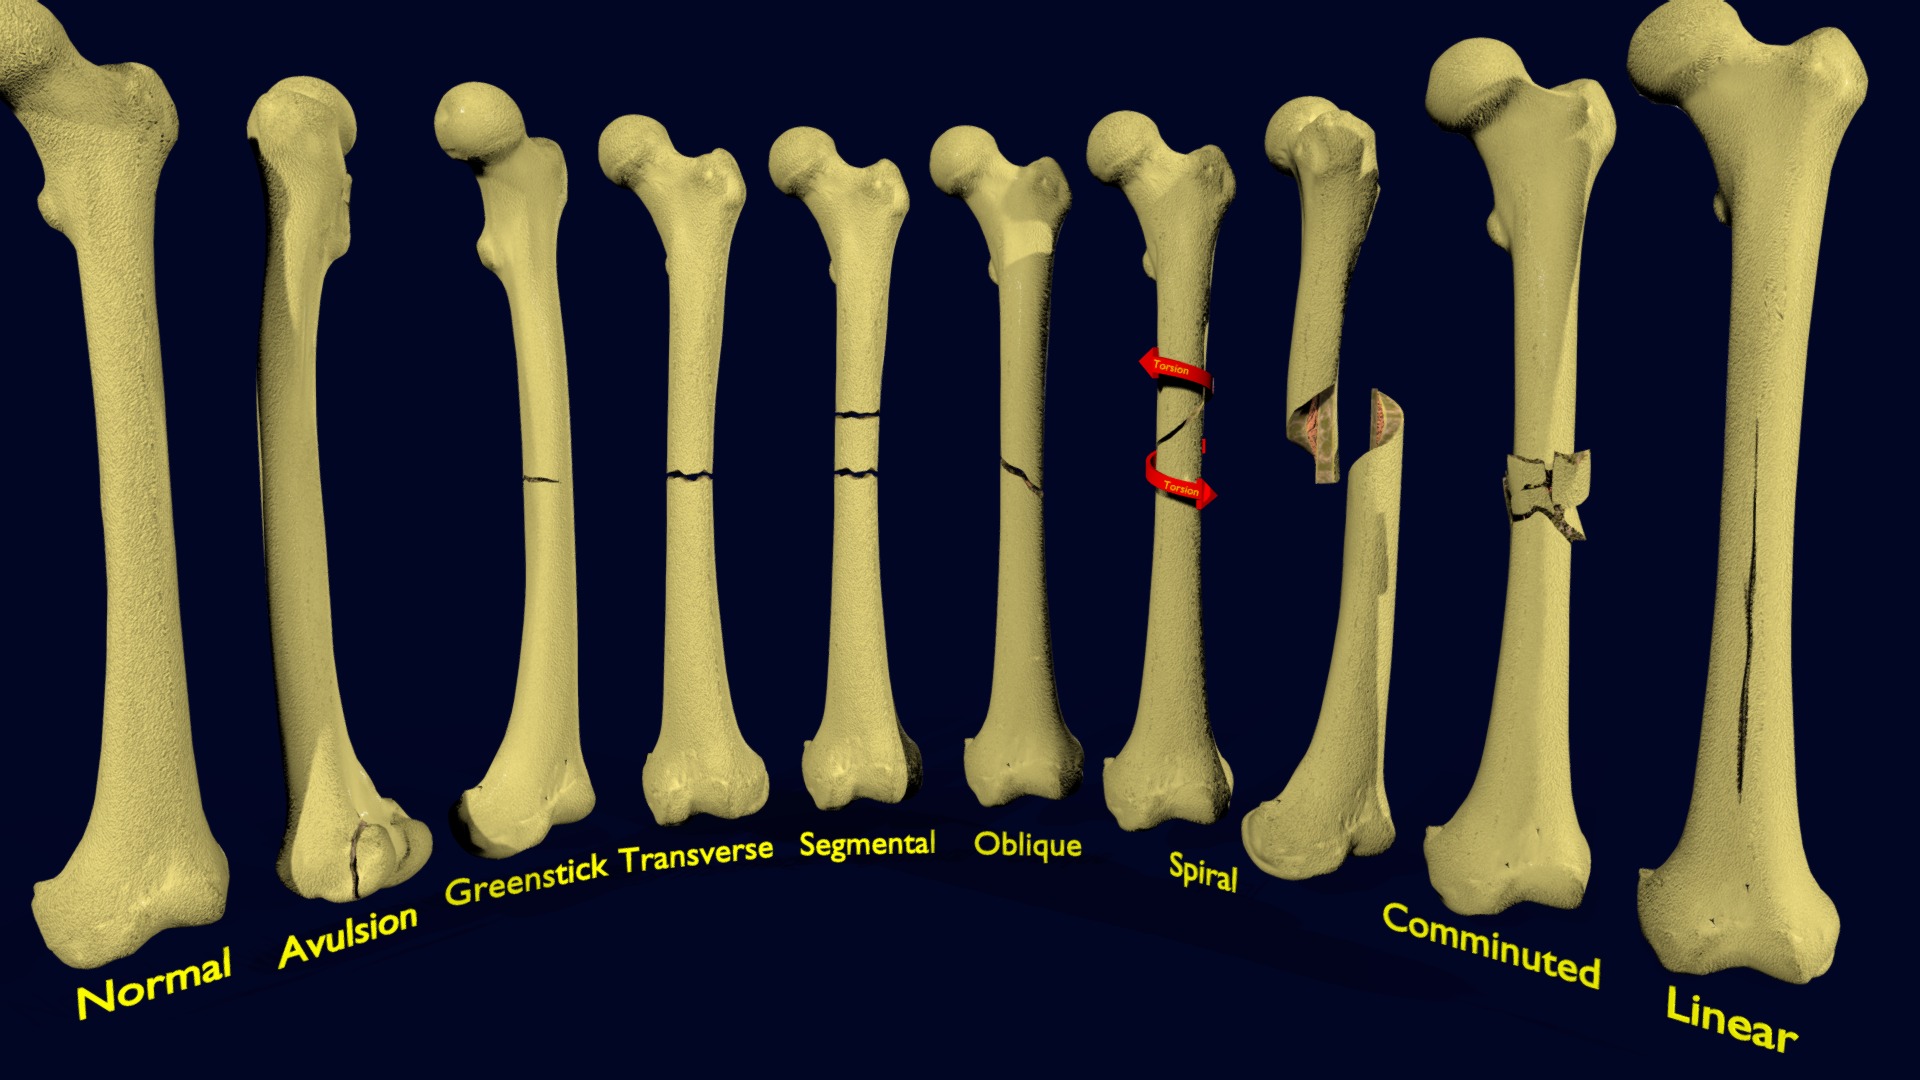 3D model Fracture types labelled - This is a 3D model of the Fracture types labelled. The 3D model is about a group of boneless teeth.